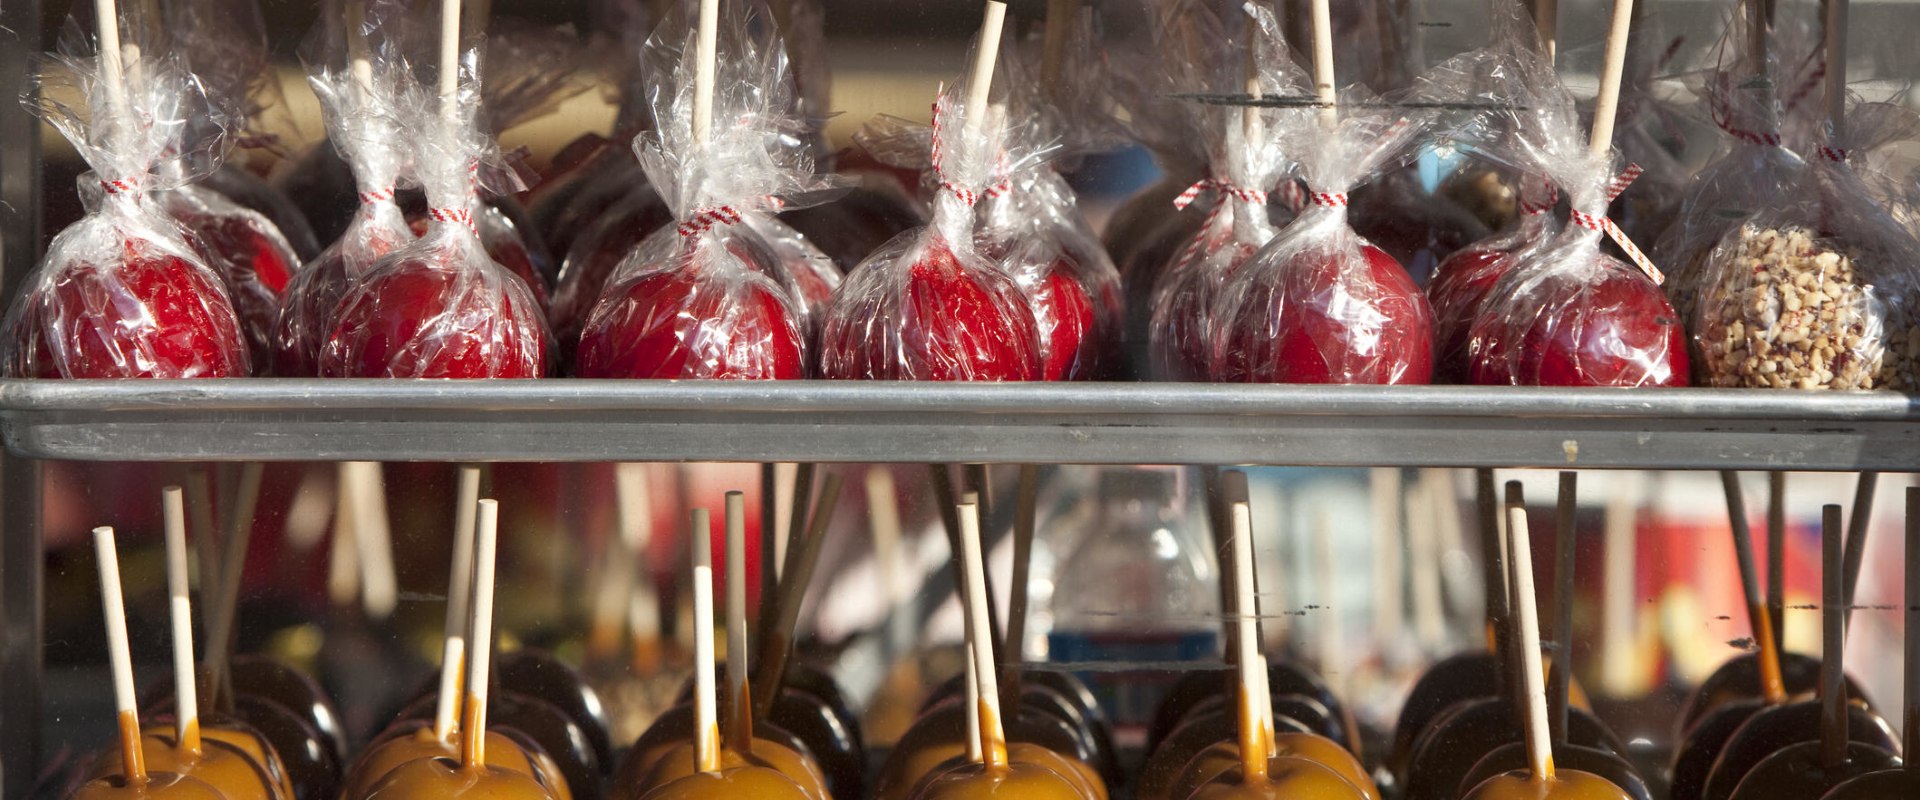 The Sweetest Treats: Exploring the Most Popular Candy in Philadelphia, PA